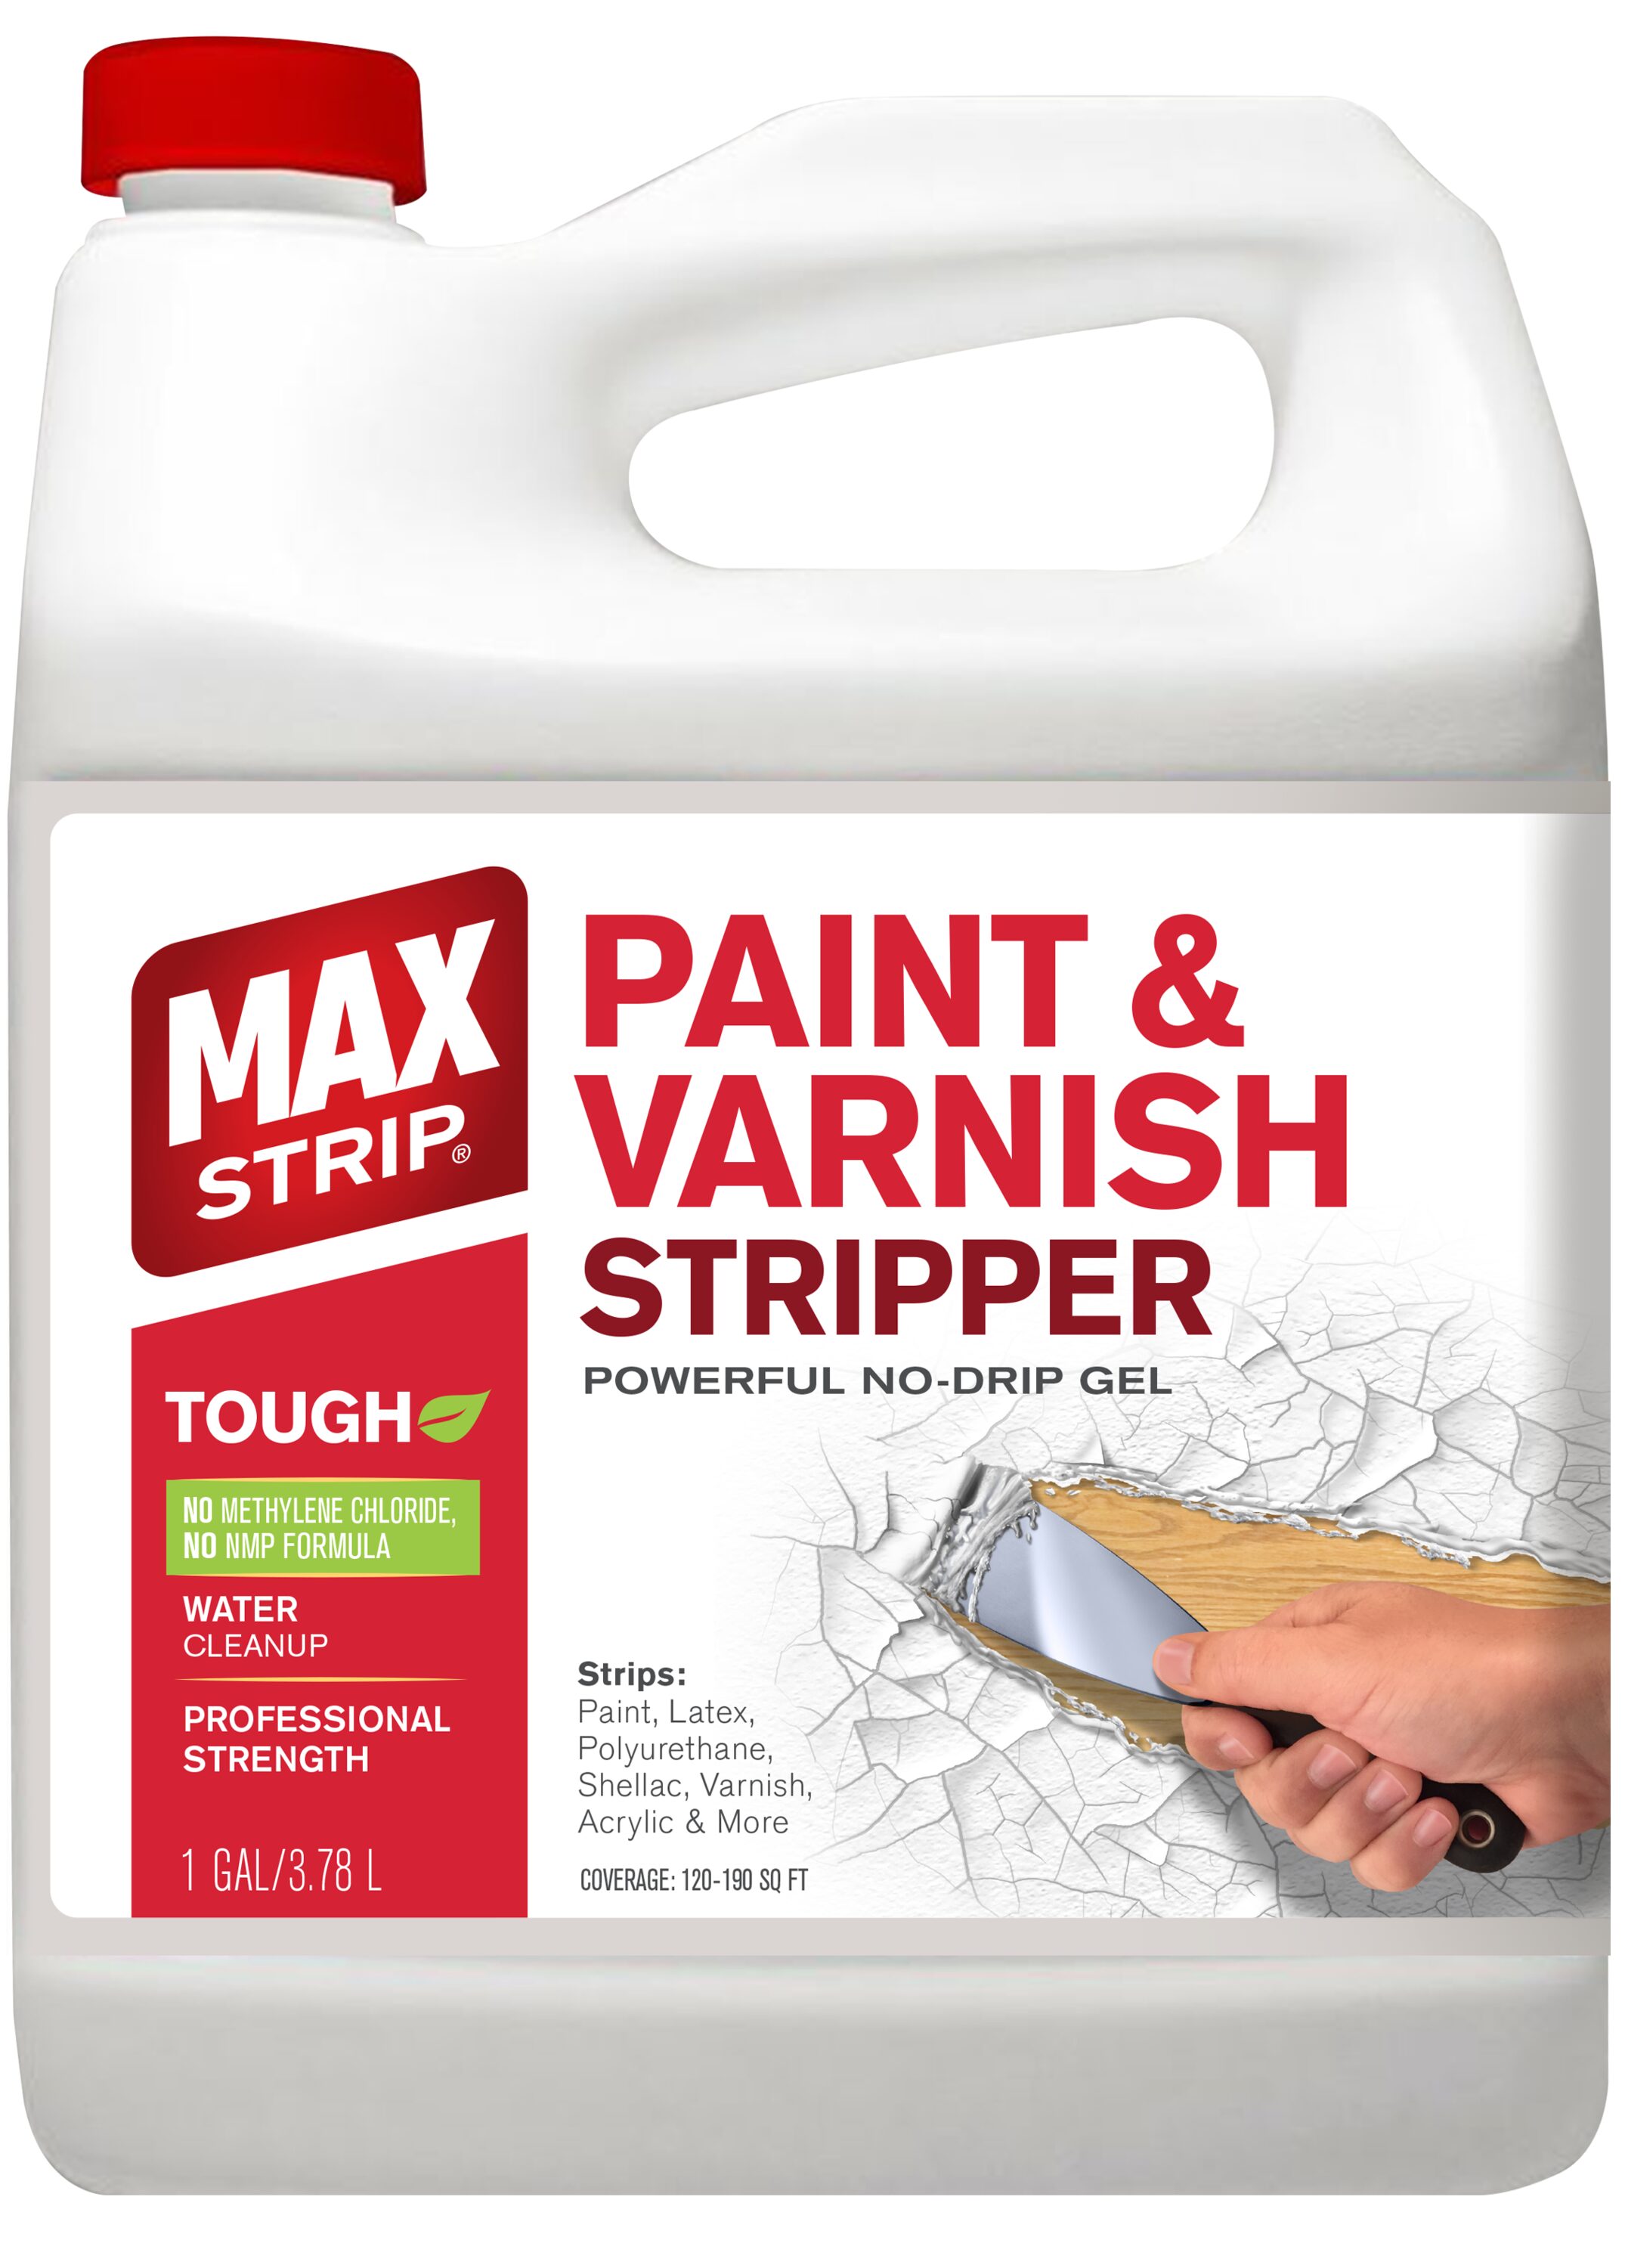 KBS Strip Quart - Paint Remover / Stripper Gel - Contains No Methylene  Chloride - Clings To Vertical Surfaces